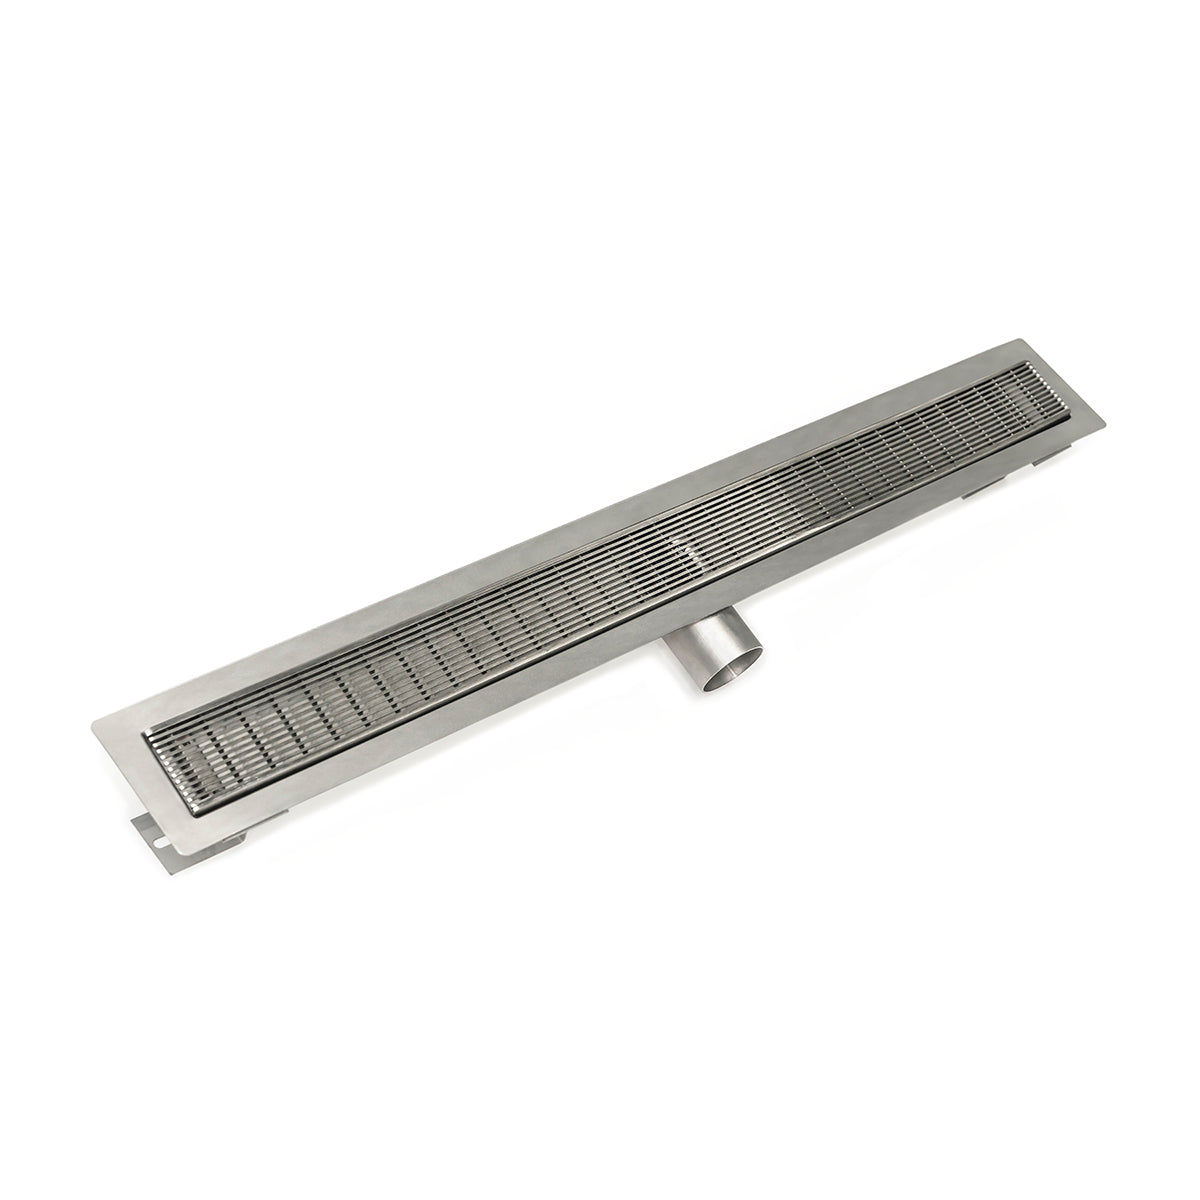 Infinity Drain 24" FT Series Side Outlet Linear Drain Kit with 2 1/2" Wedge Wire Grate